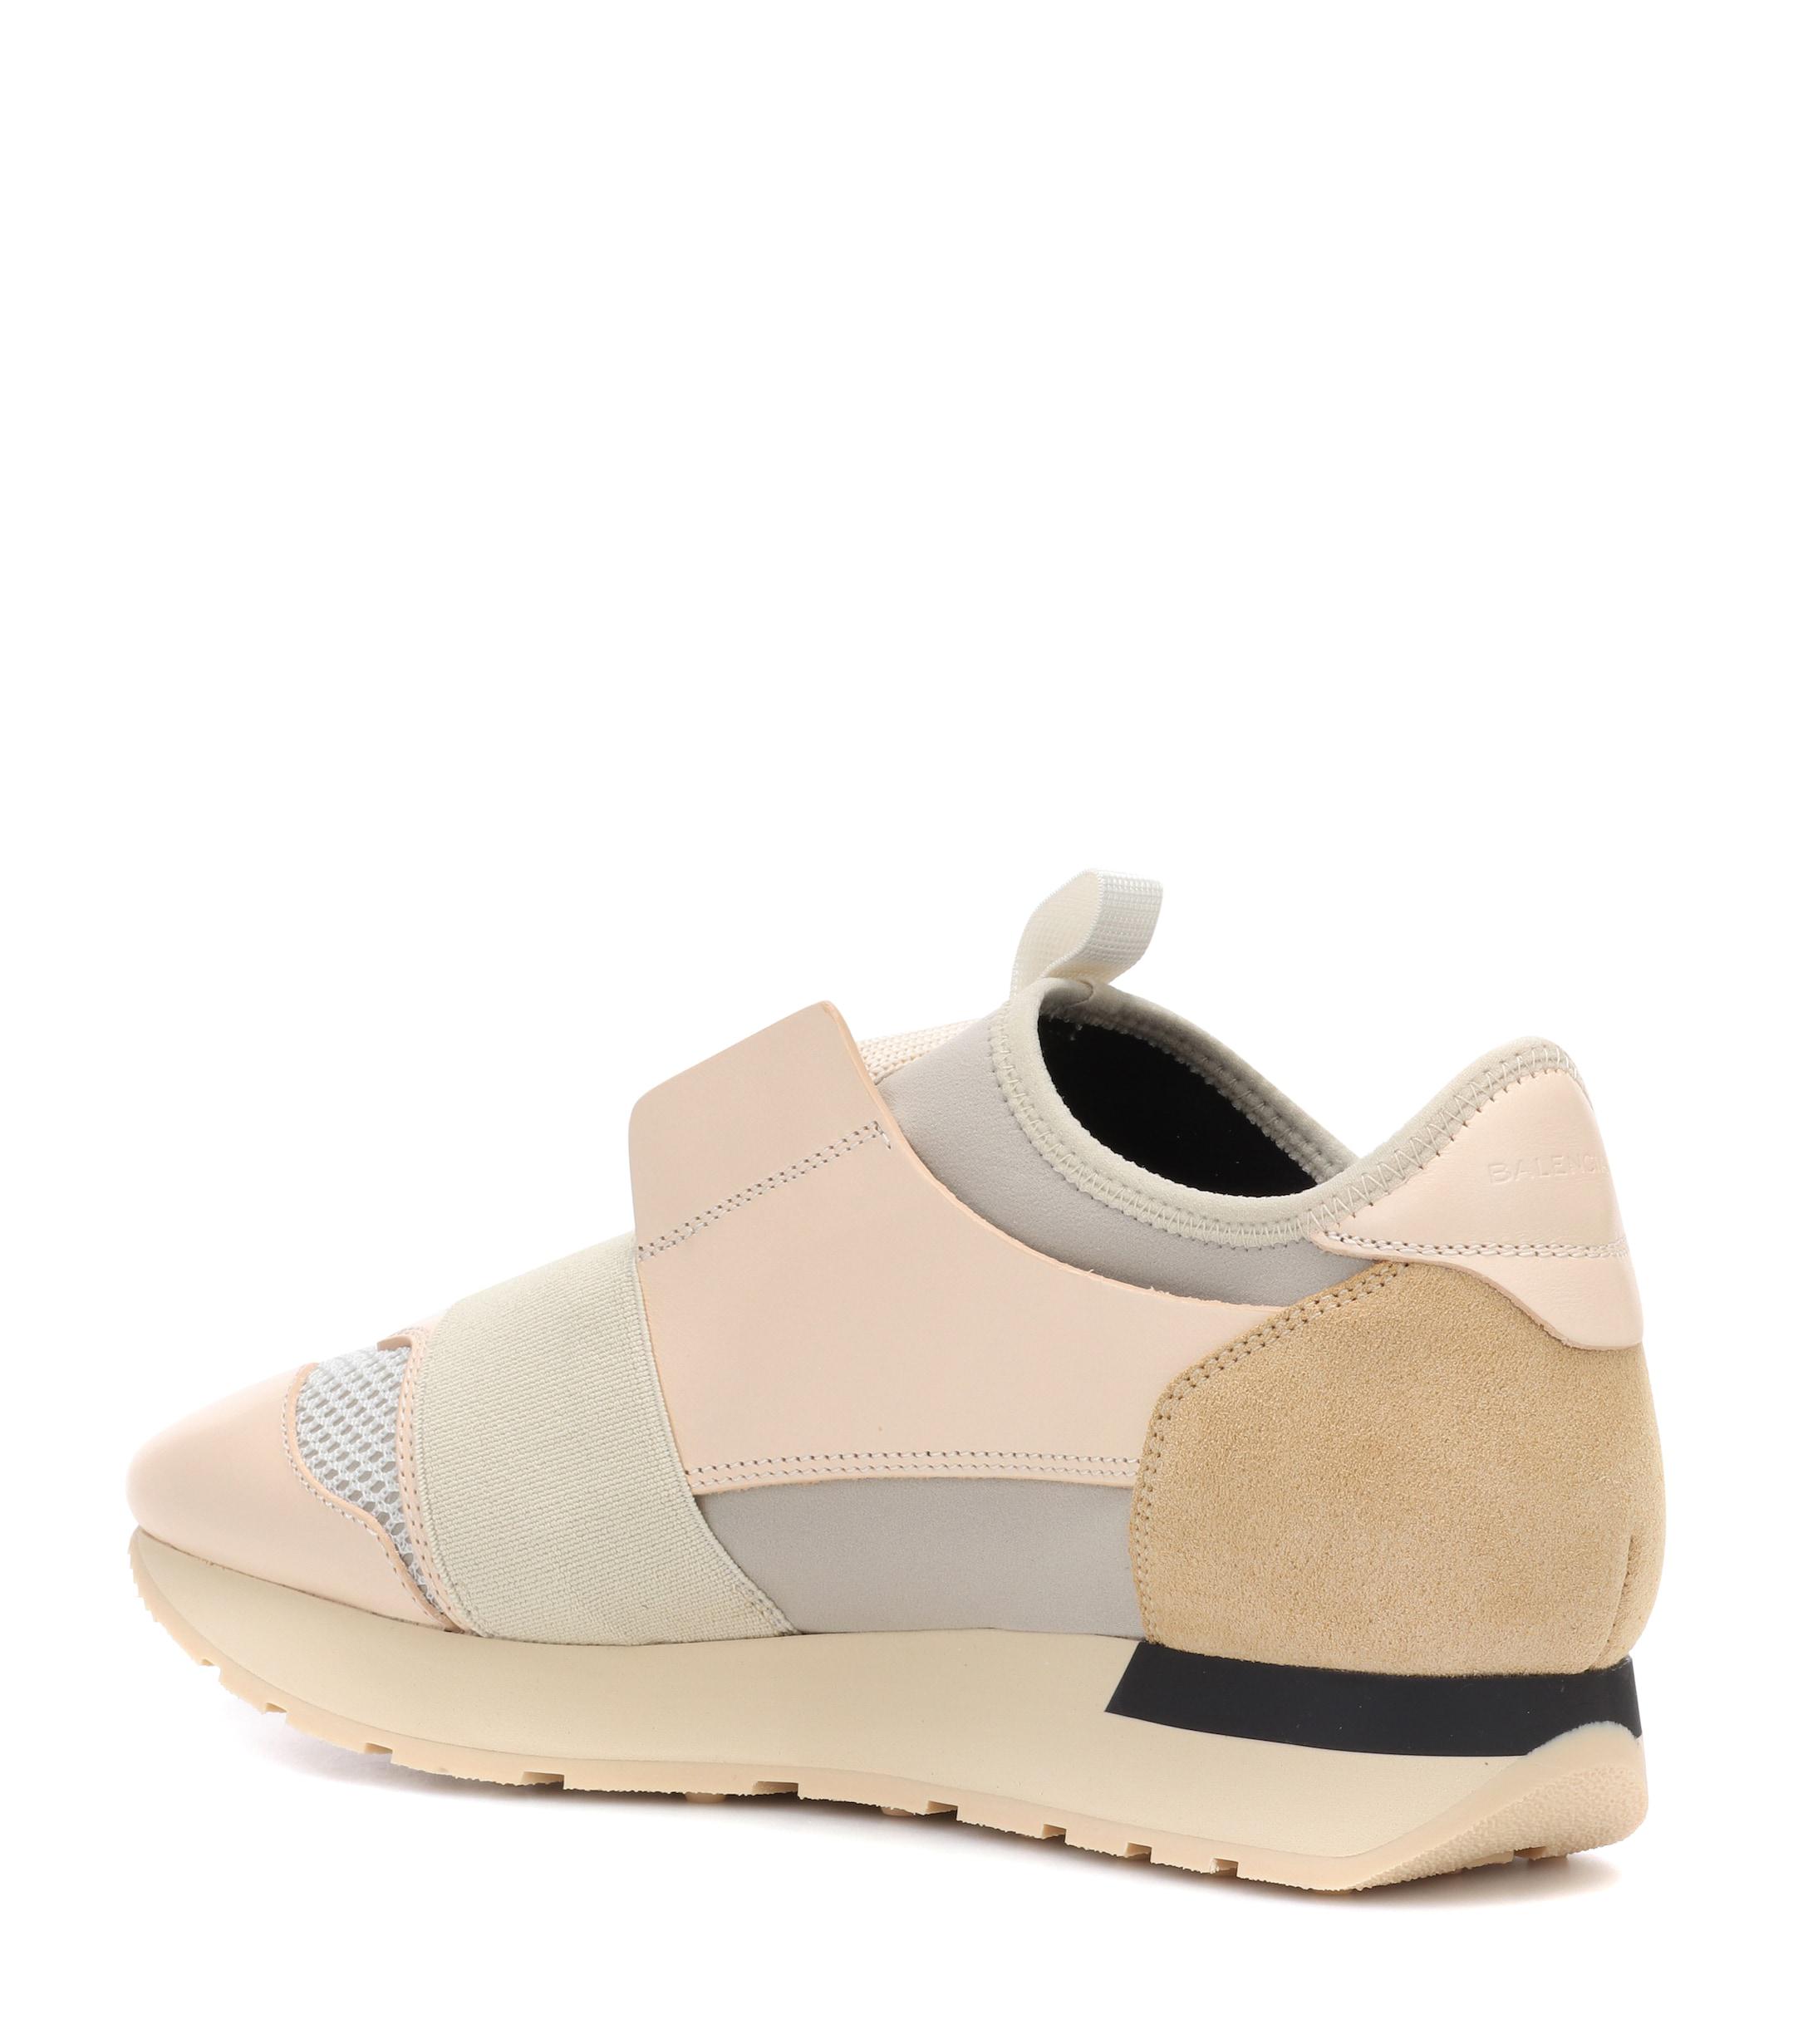 Balenciaga Race Runner Leather, Suede, Mesh And Neoprene Sneakers in Beige  (Natural) - Lyst